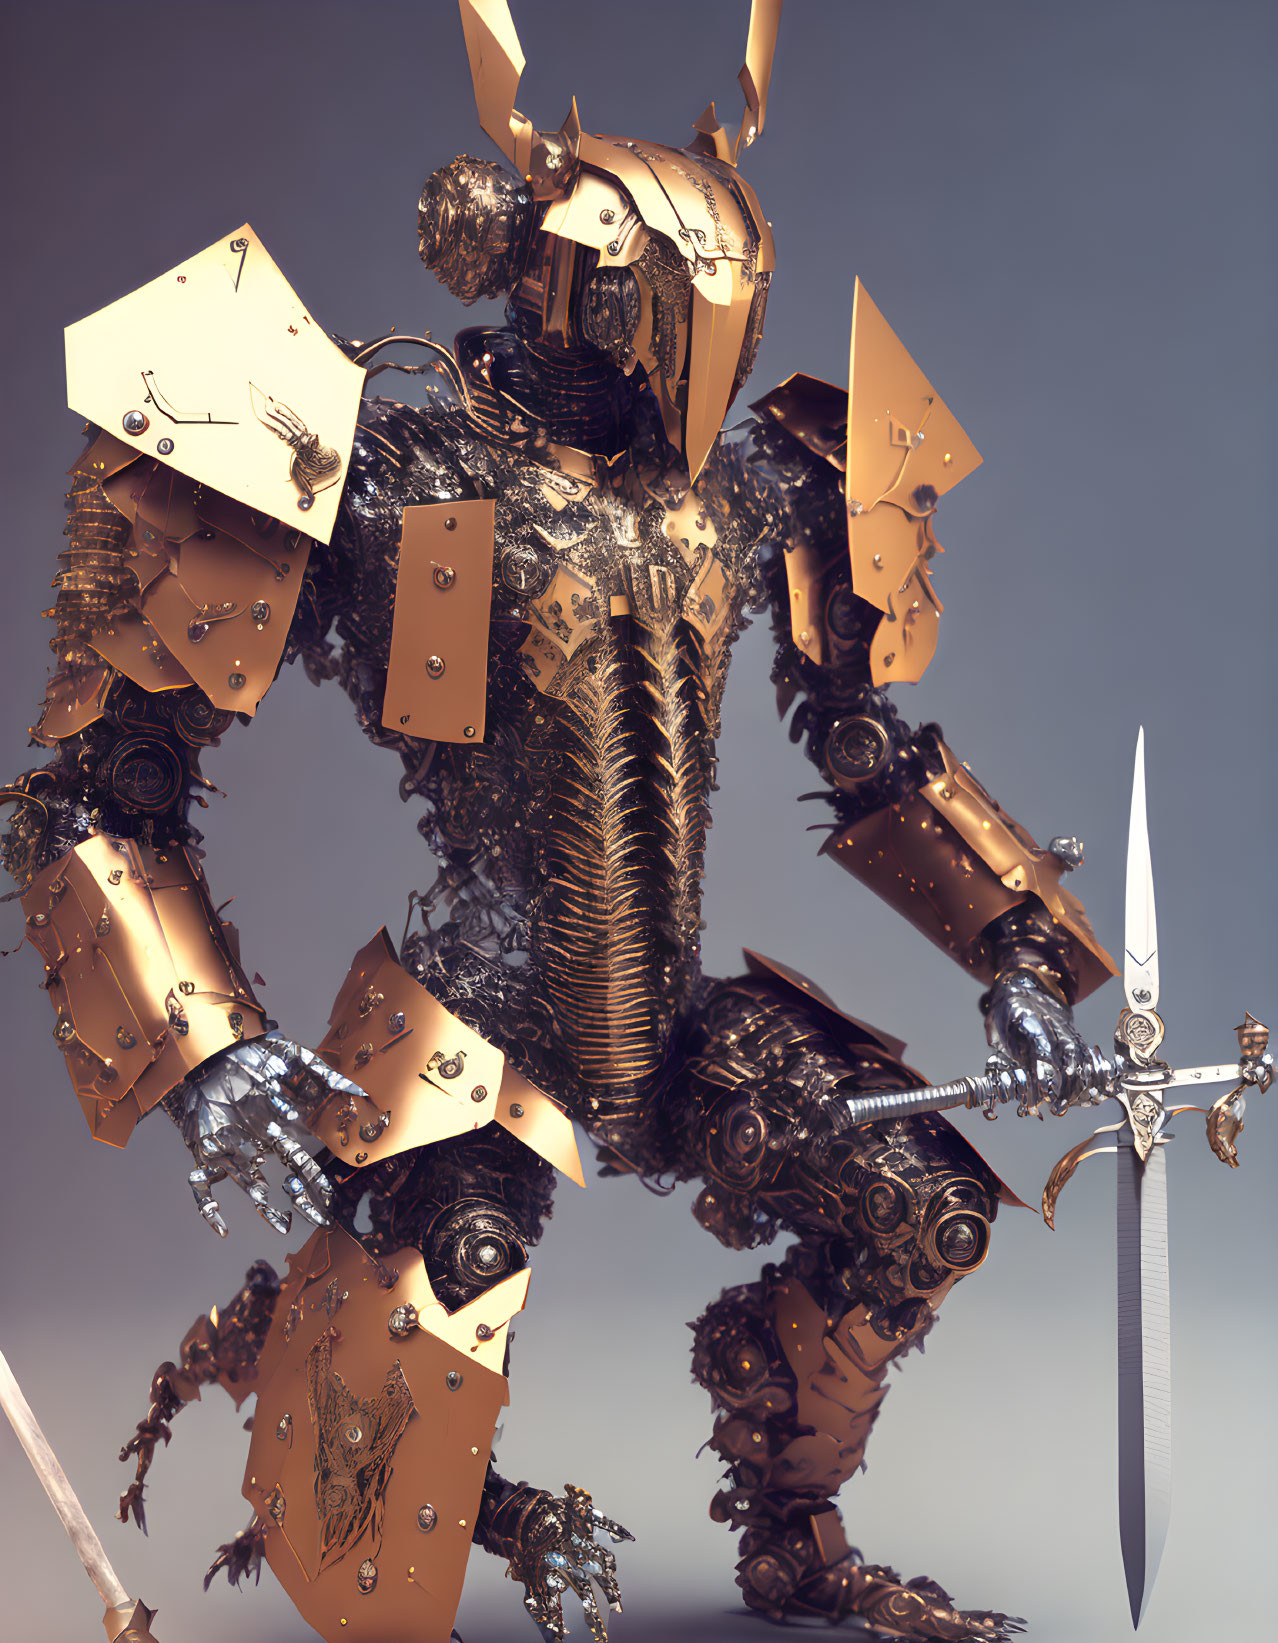 robotic termite man with a sword in battle